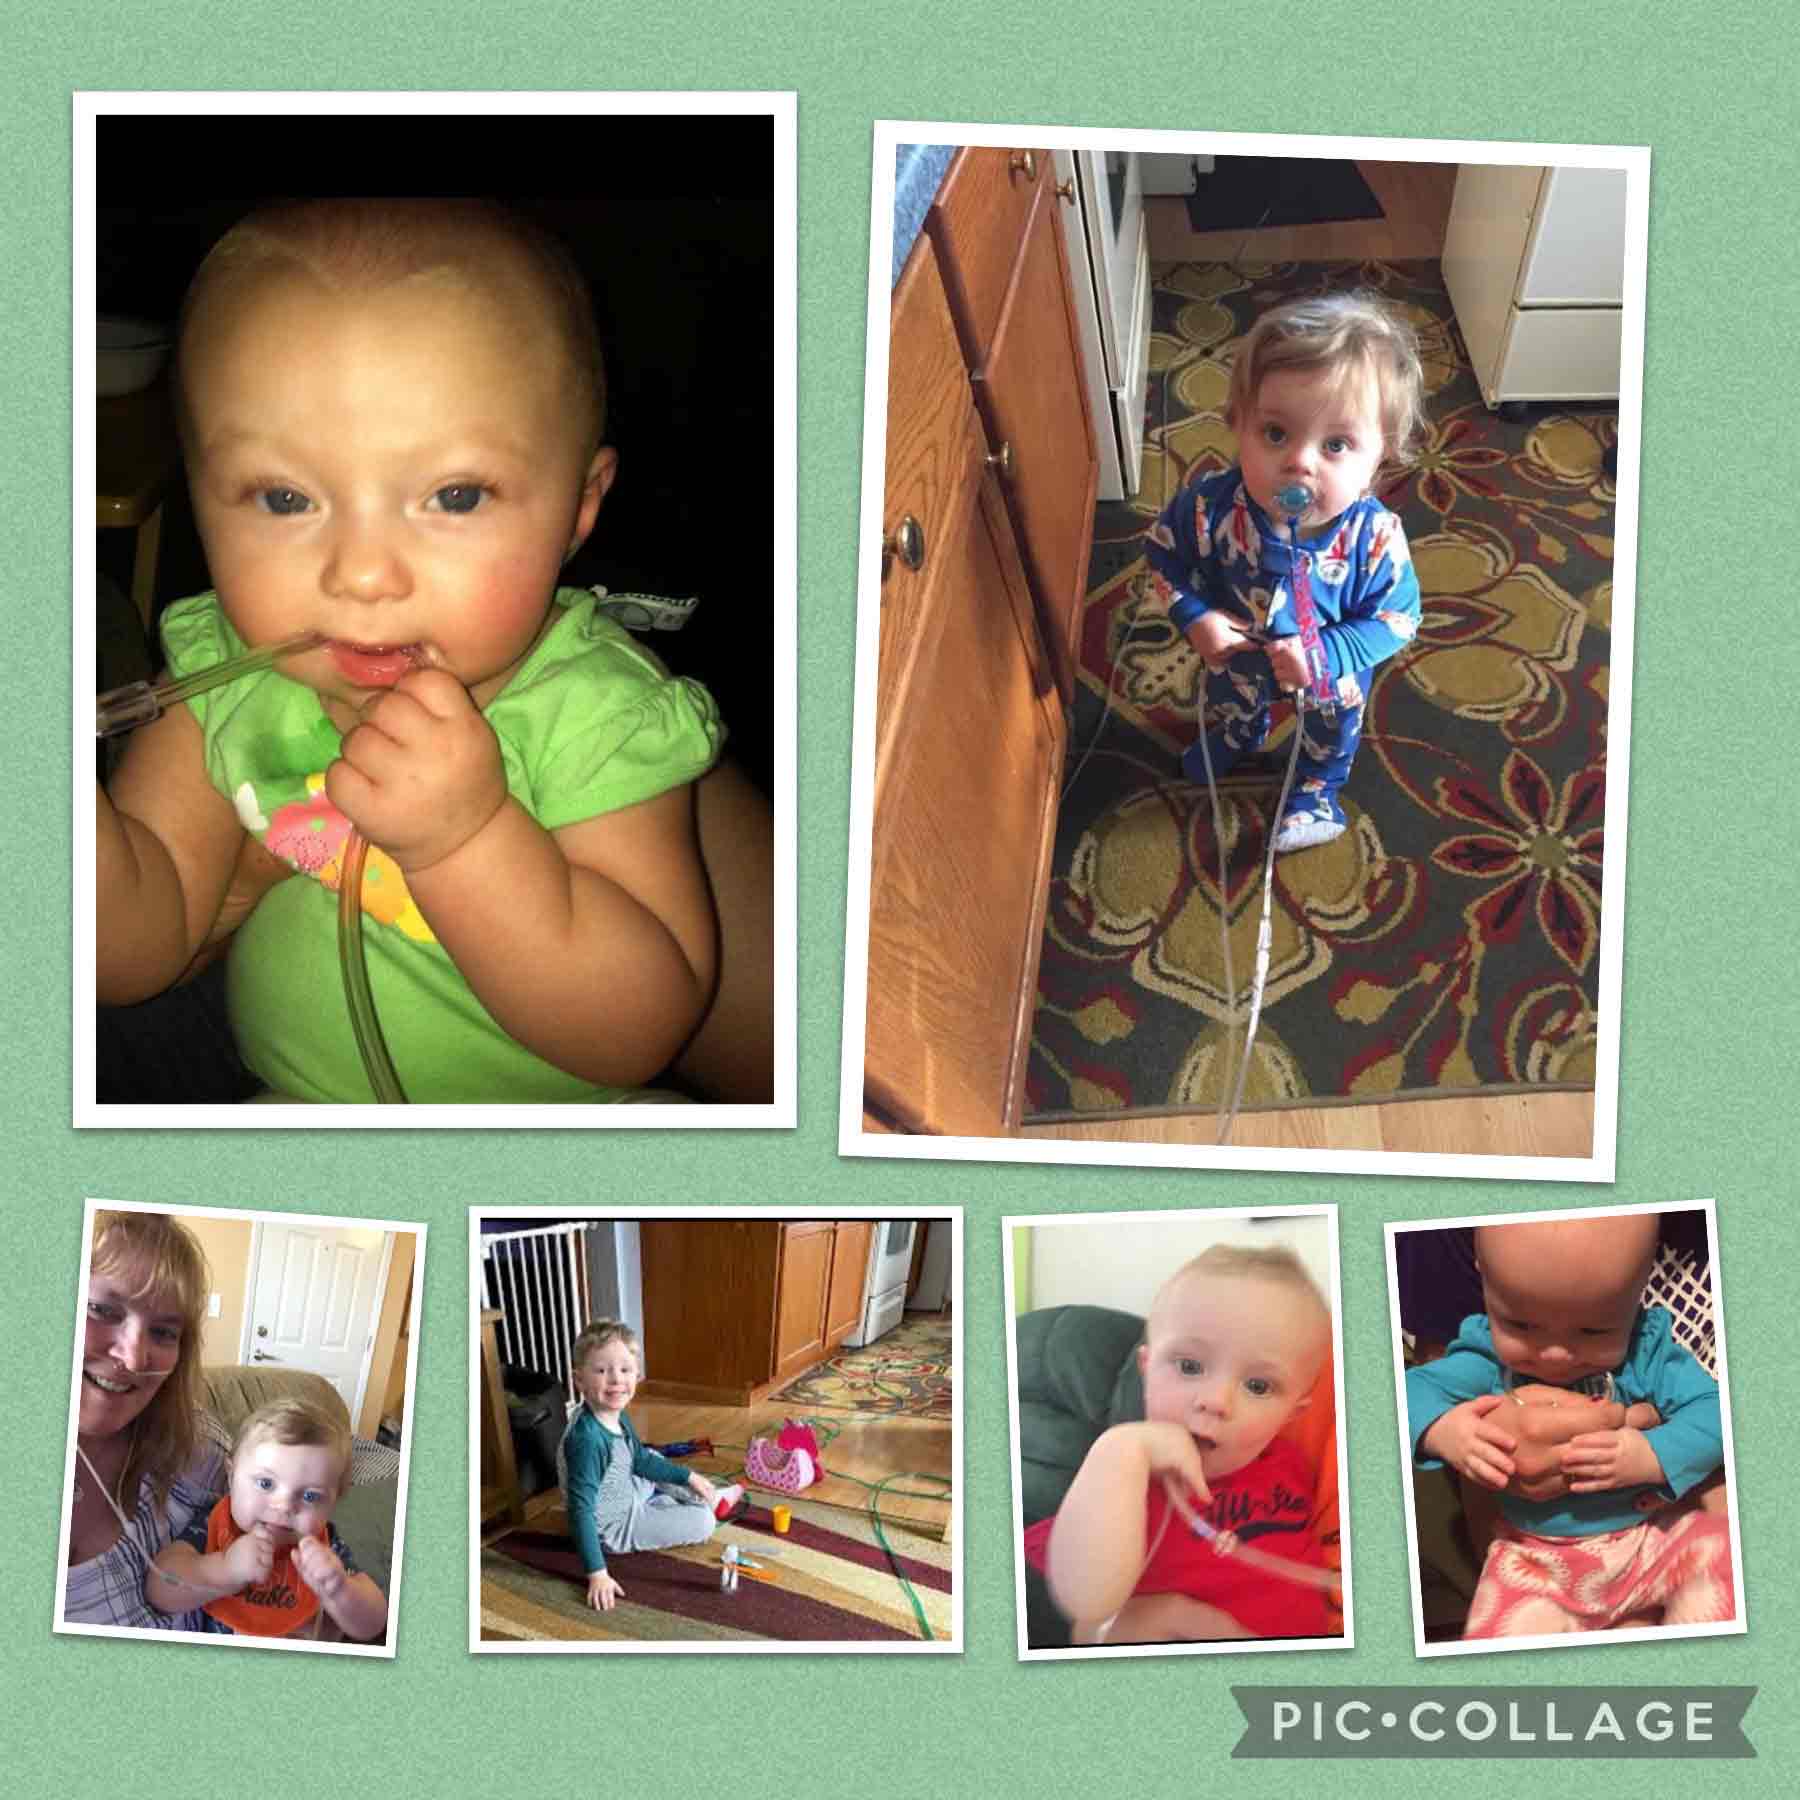 My grandkids teething on or playing around my hoses.